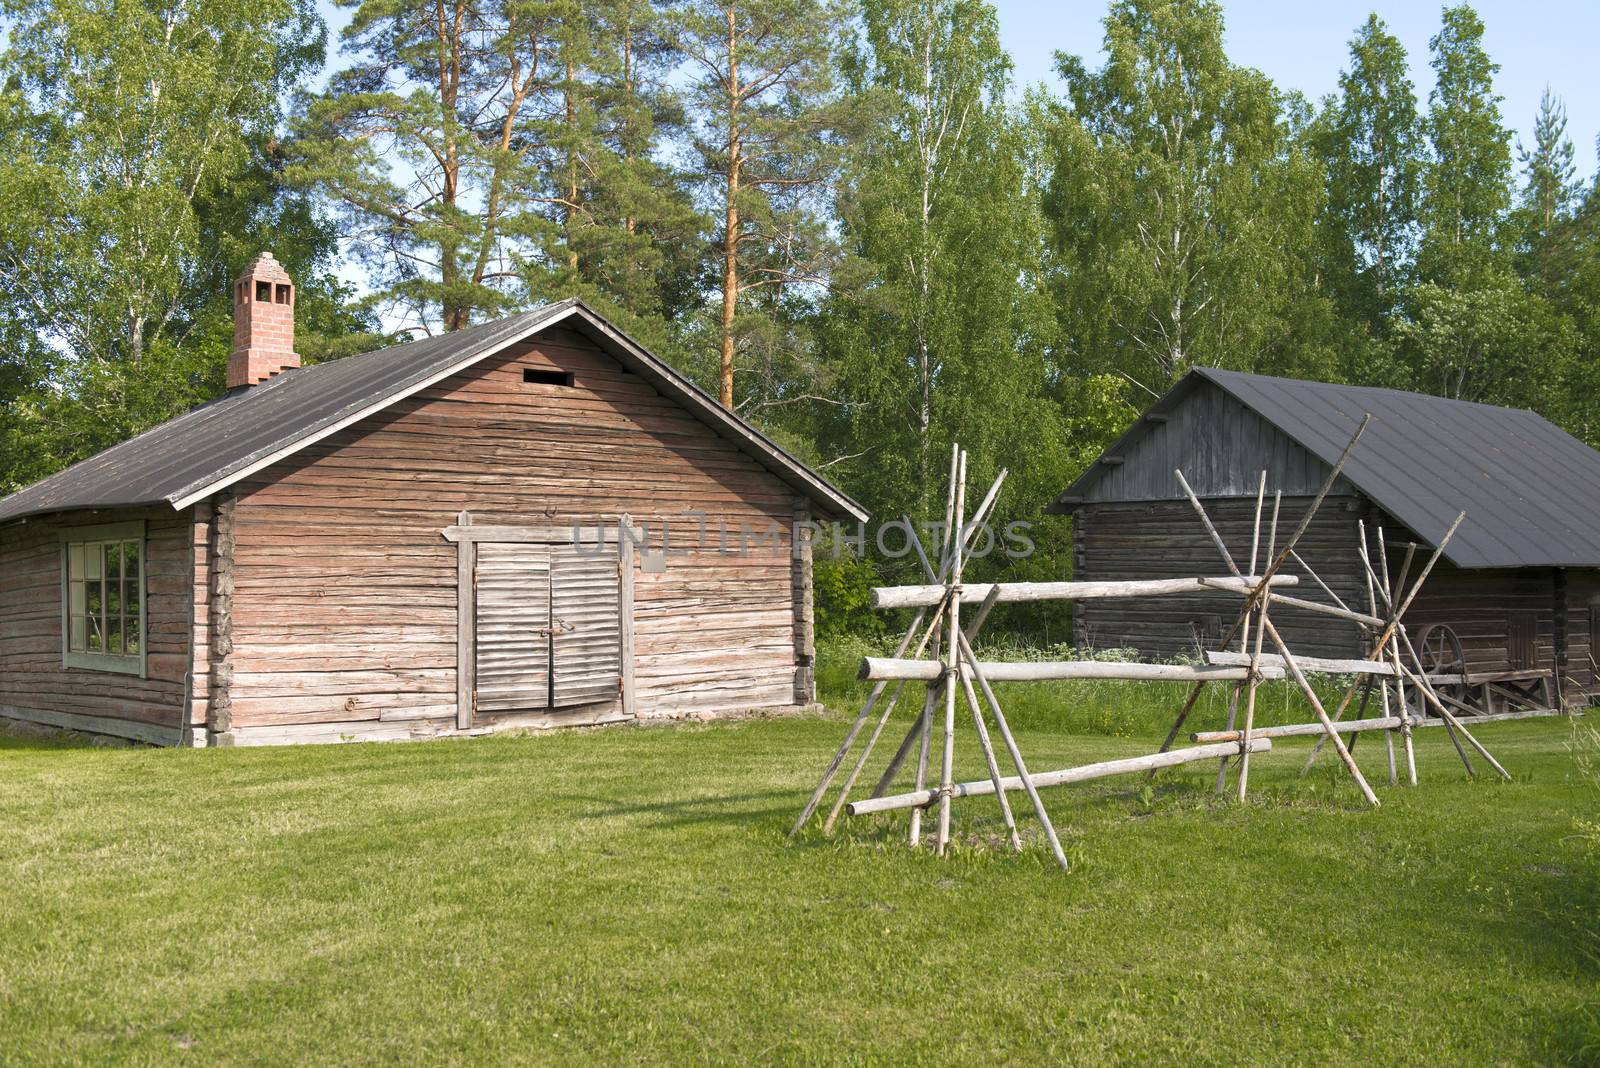 Old wooden houses in Finland







Old village in Finland







Open museum of old scandinavian village in Finland